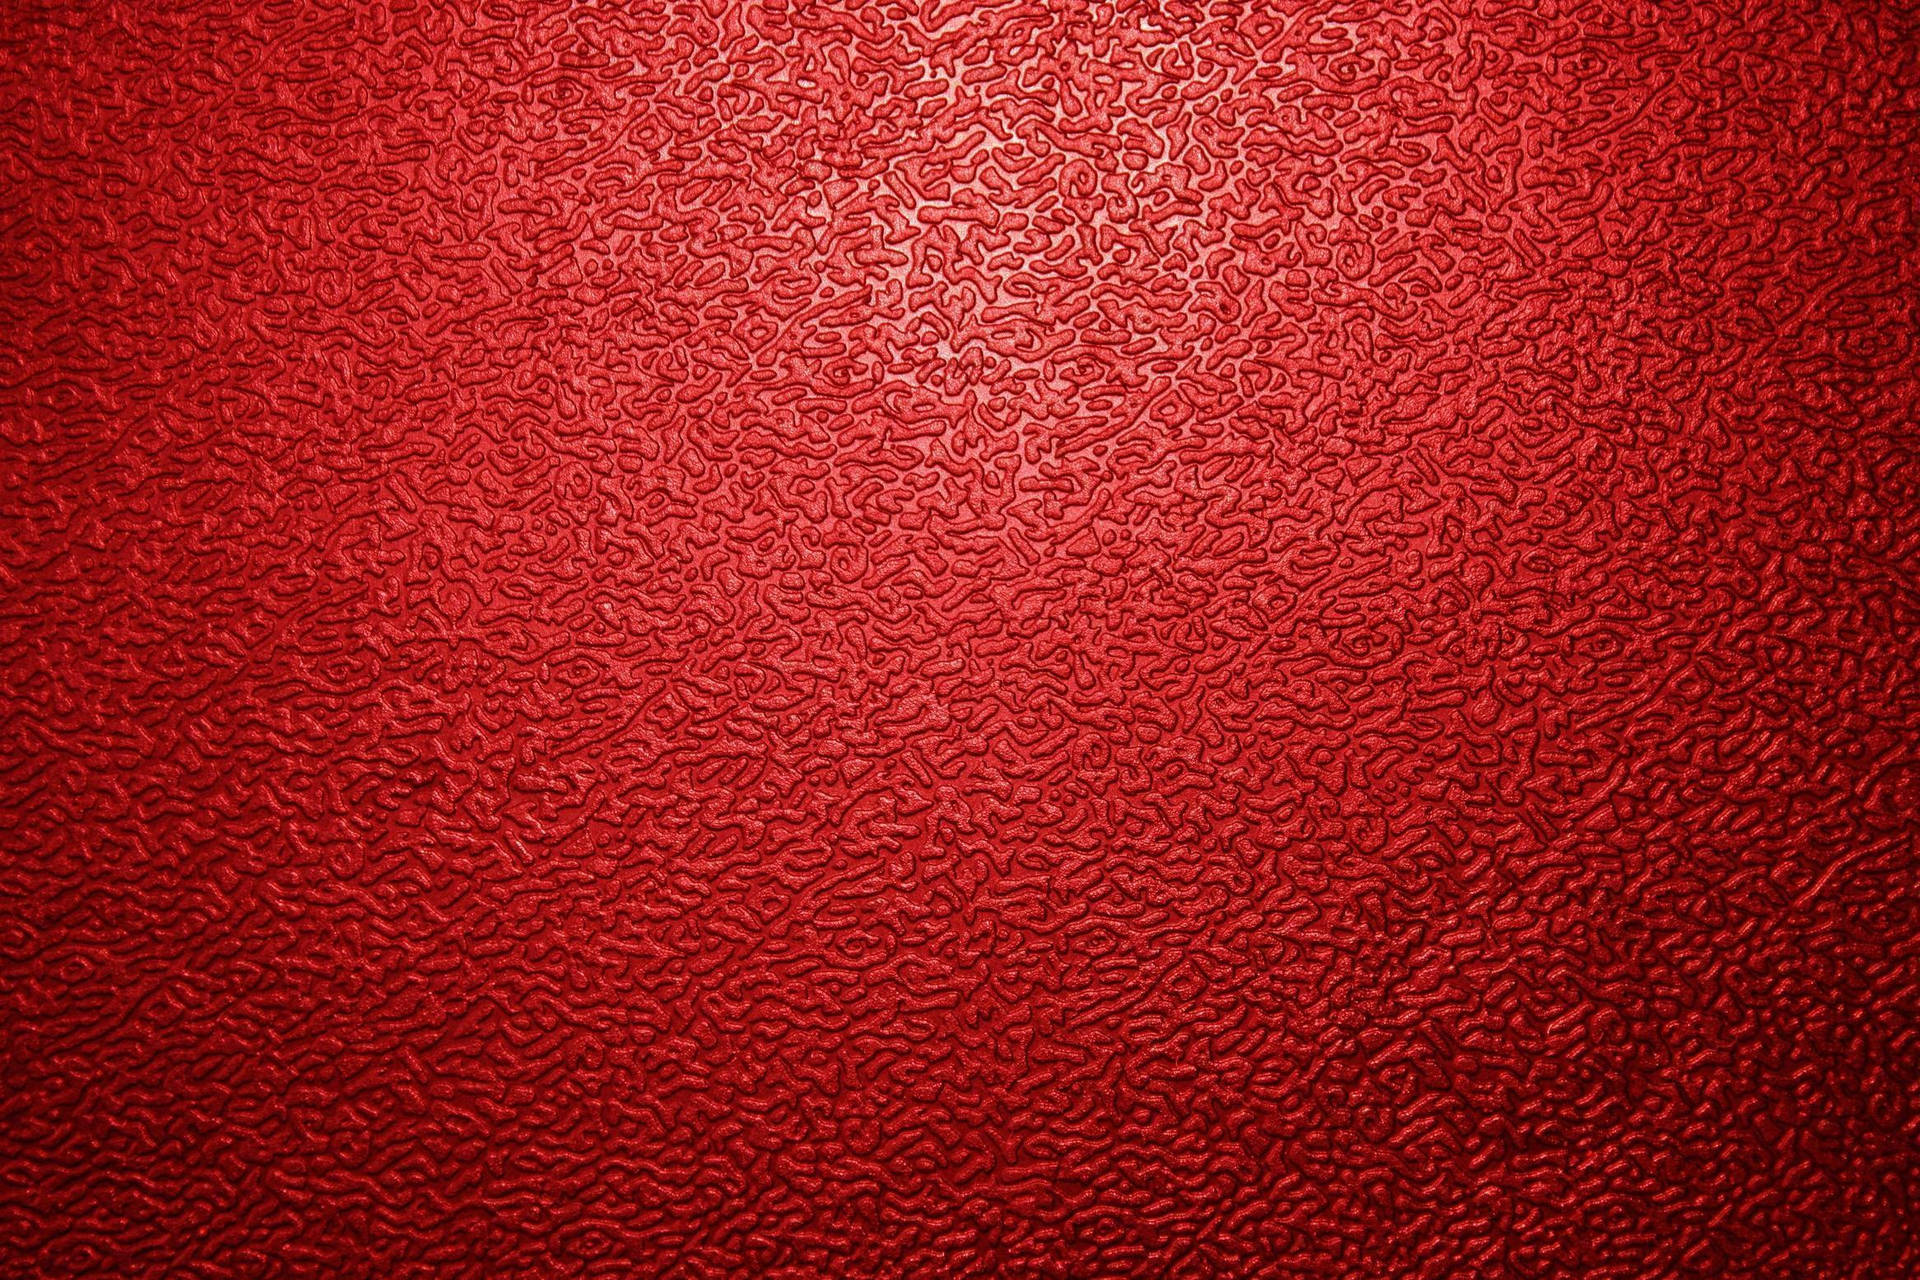 Free Red Color Wallpaper Downloads, [200+] Red Color Wallpapers for FREE |  